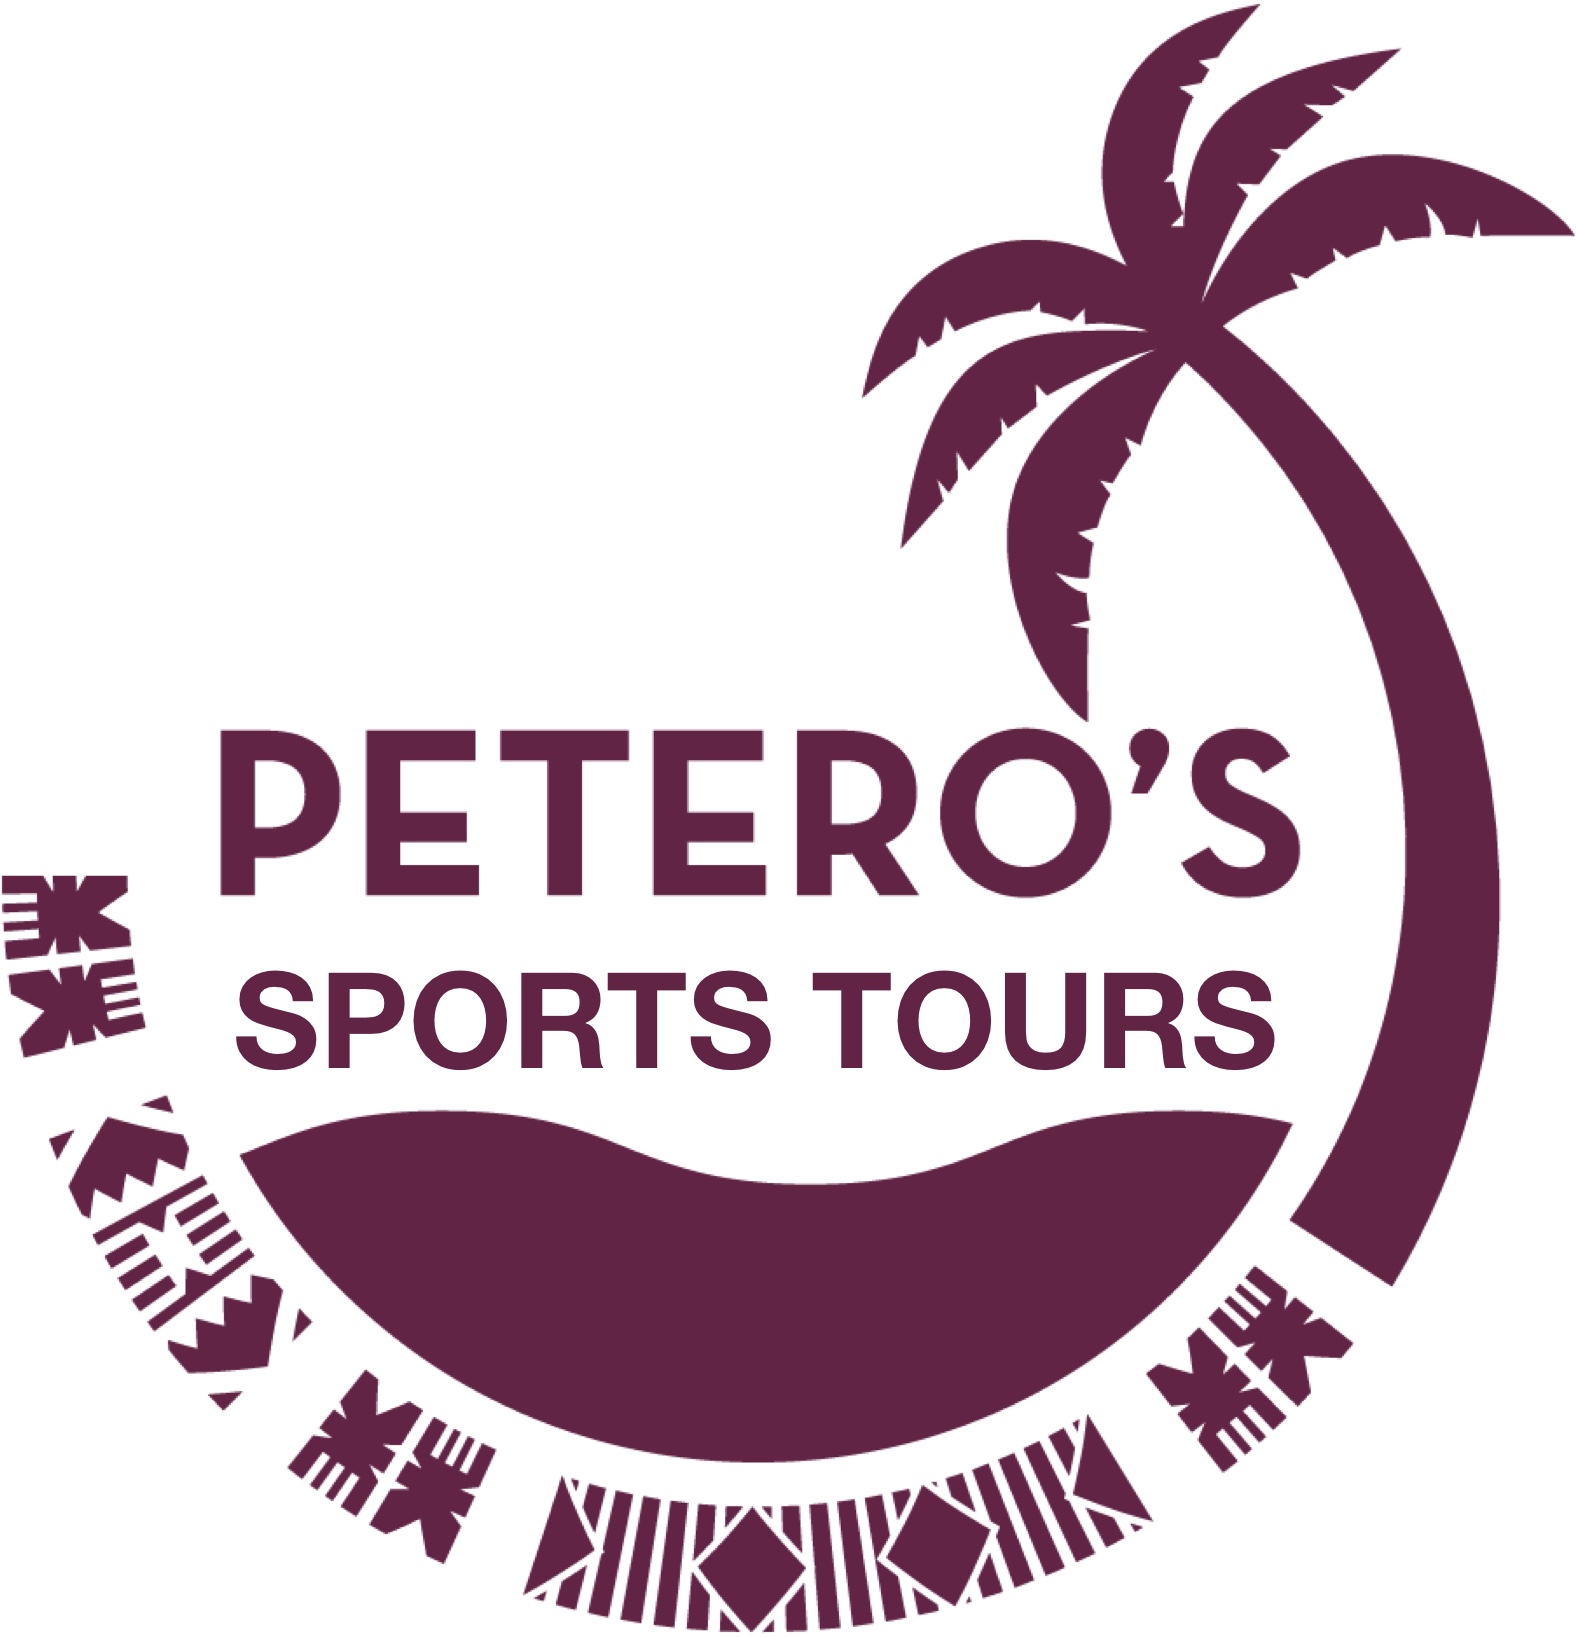 Petero's Sports Tours – Sports Tours With A Difference